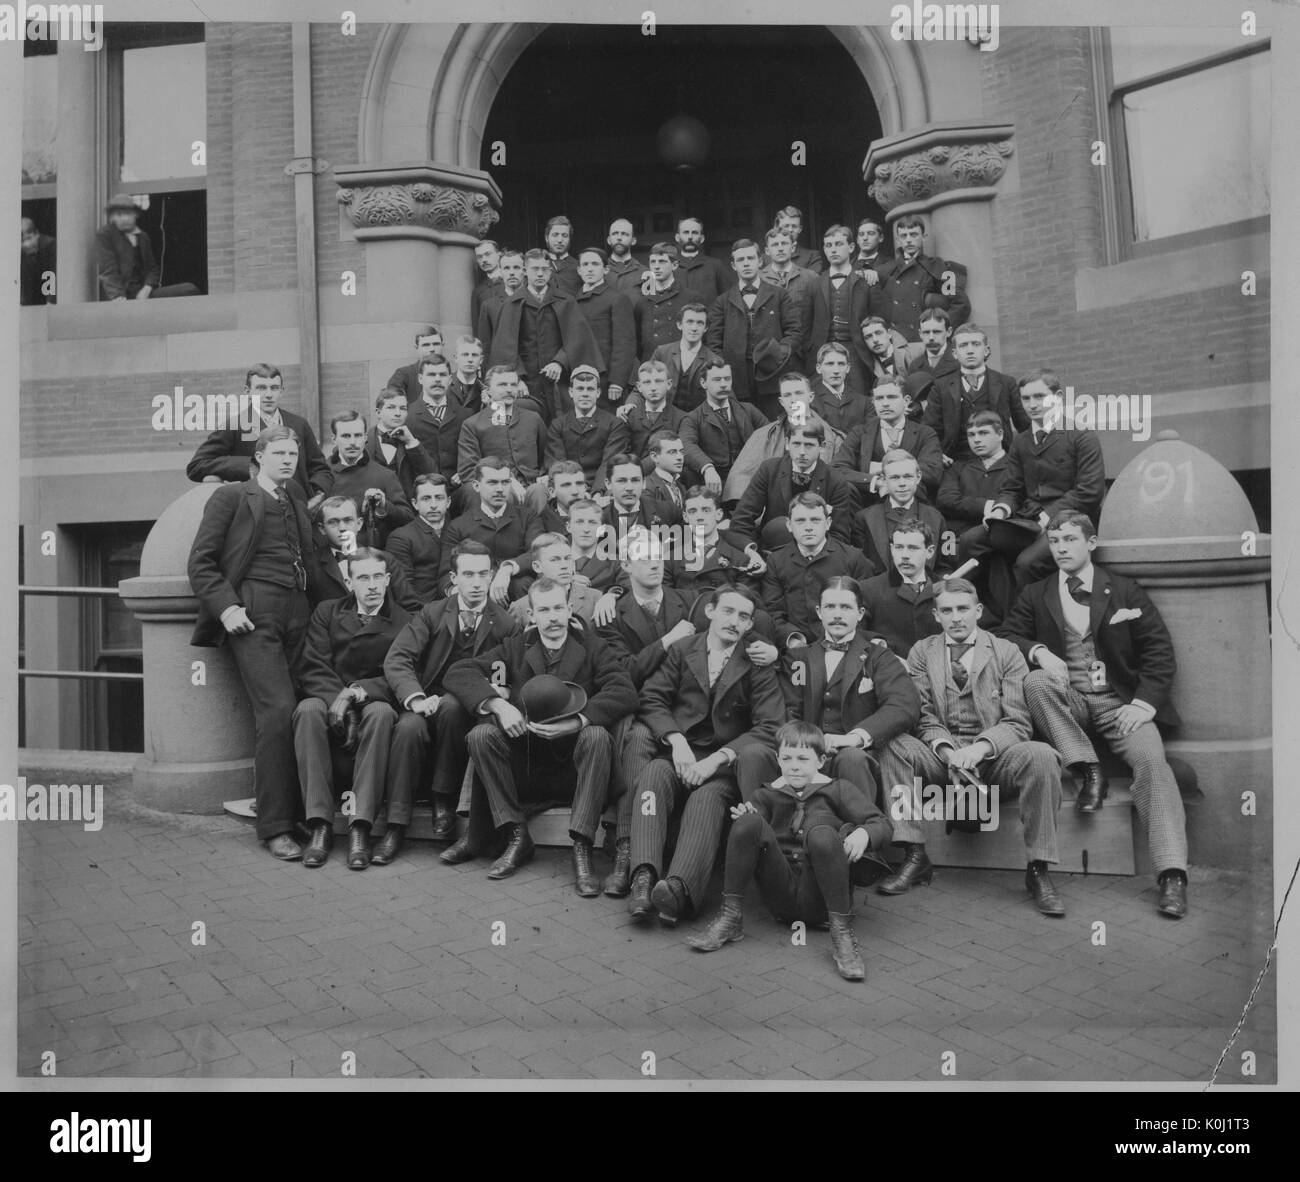 Group portrait of the Johns Hopkins University class of 1890, gathered on the steps to a large brick building. 1890. Stock Photo